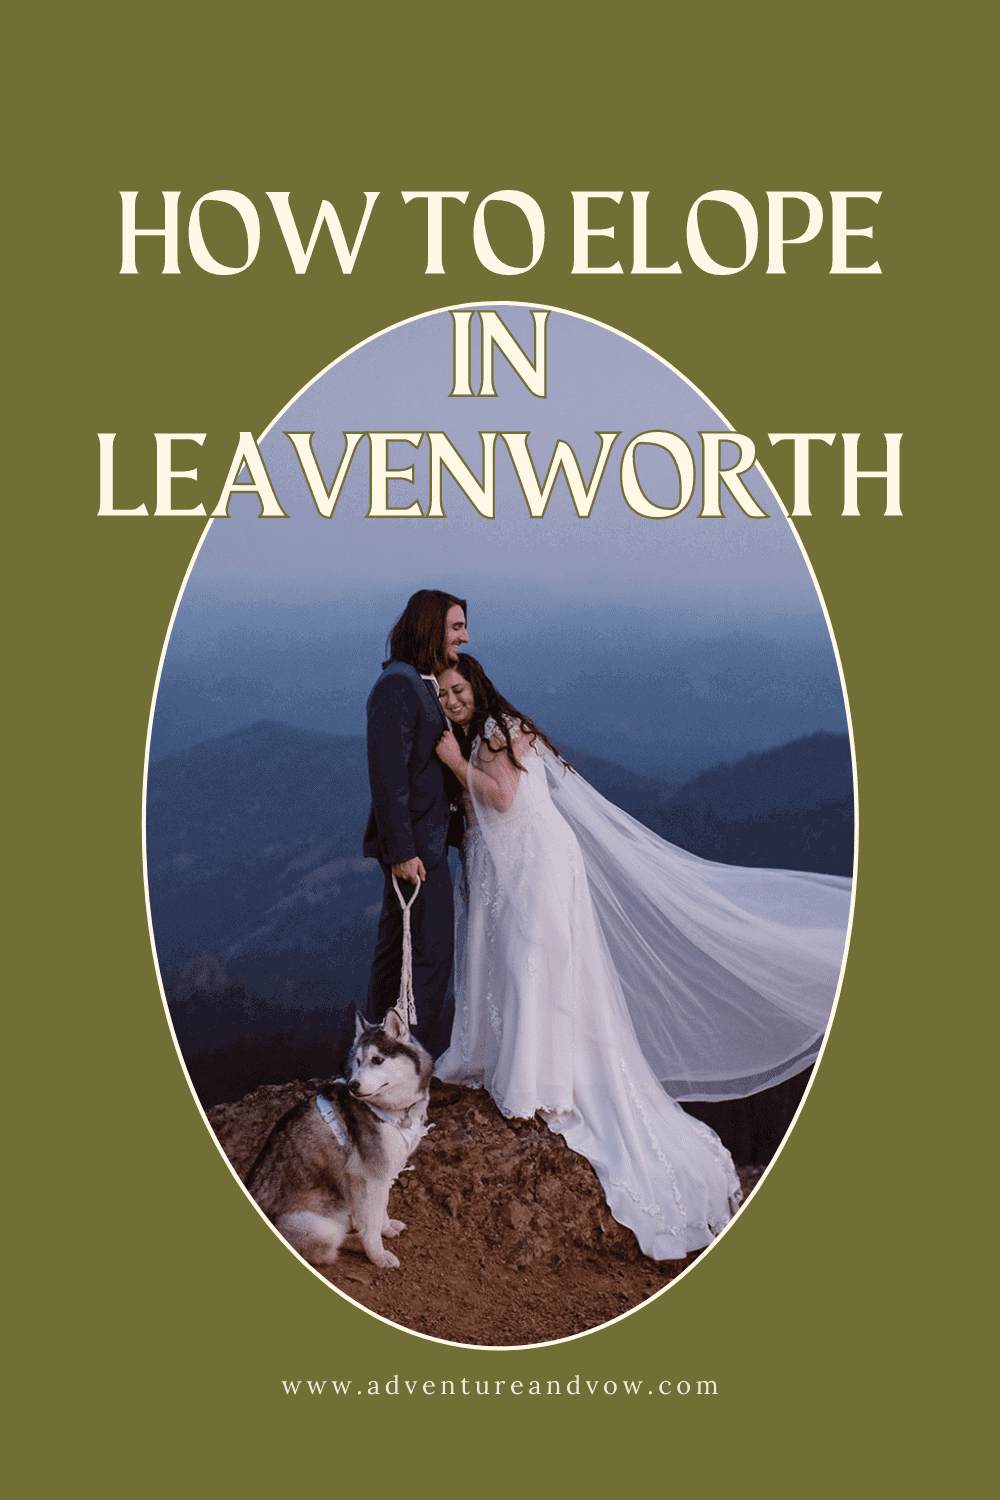 How to elope in Leavenworth